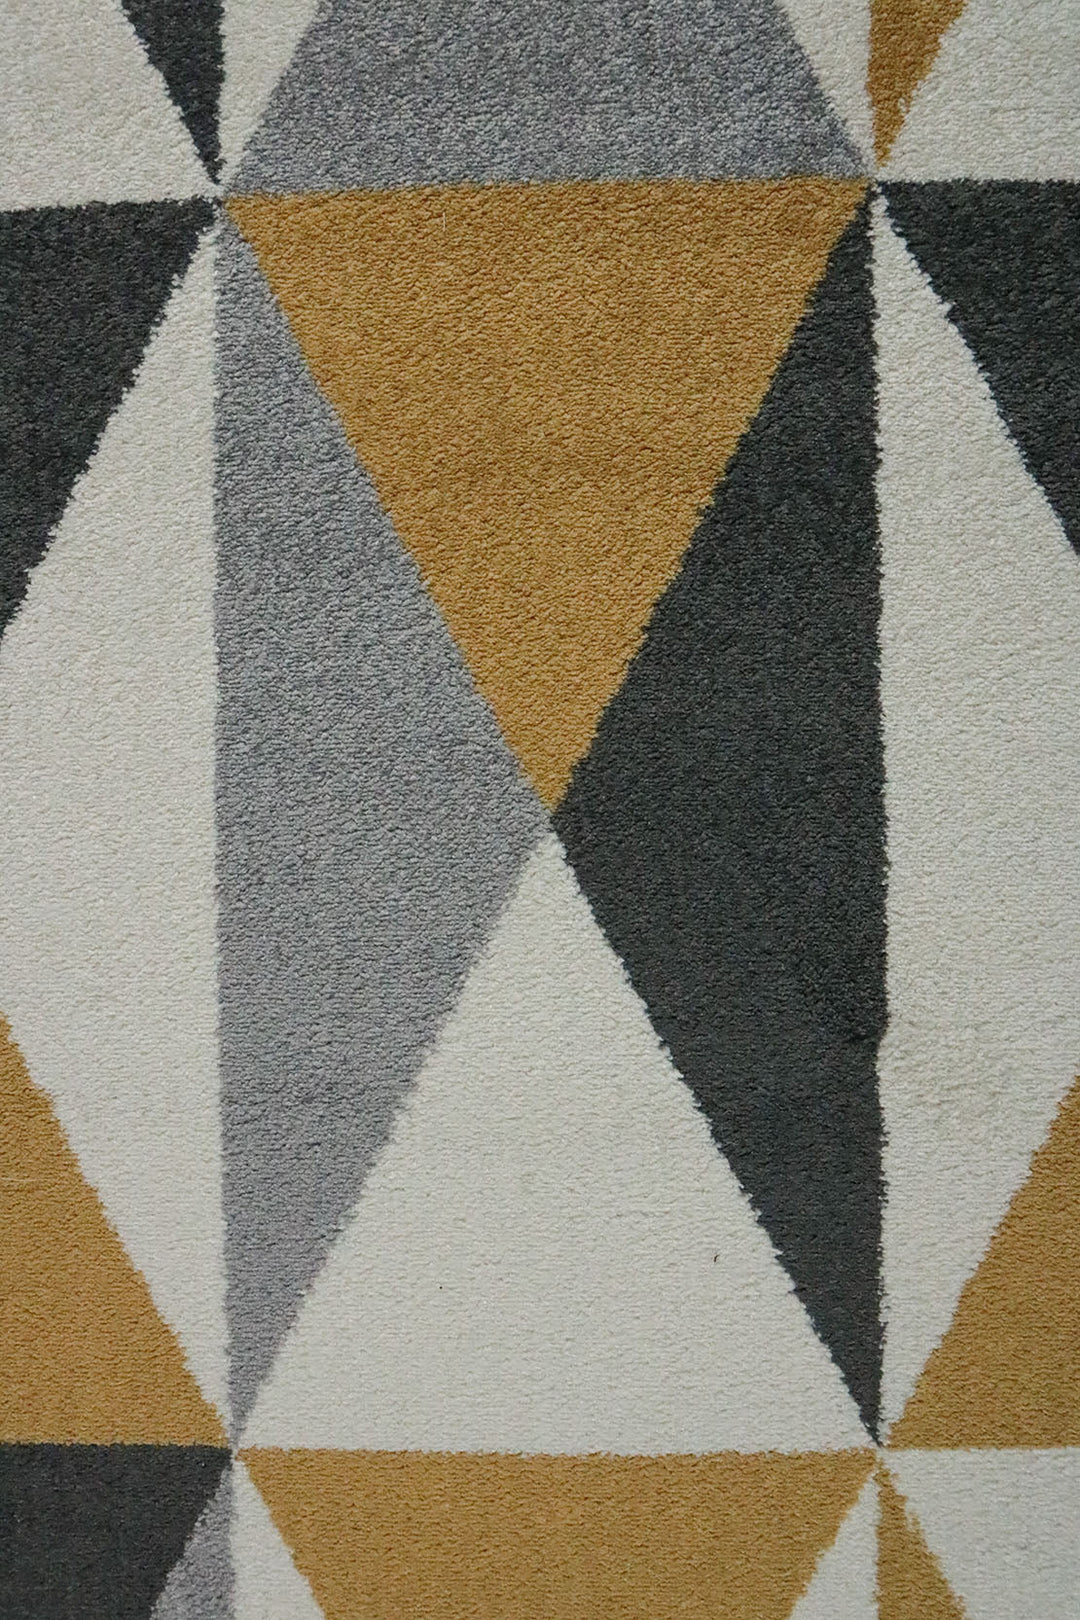 Turkish Modern Festival WD Rug - 4.9 x 6.5 FT - Cream and Yellow - Sleek and Minimalist for Chic Interiors - V Surfaces